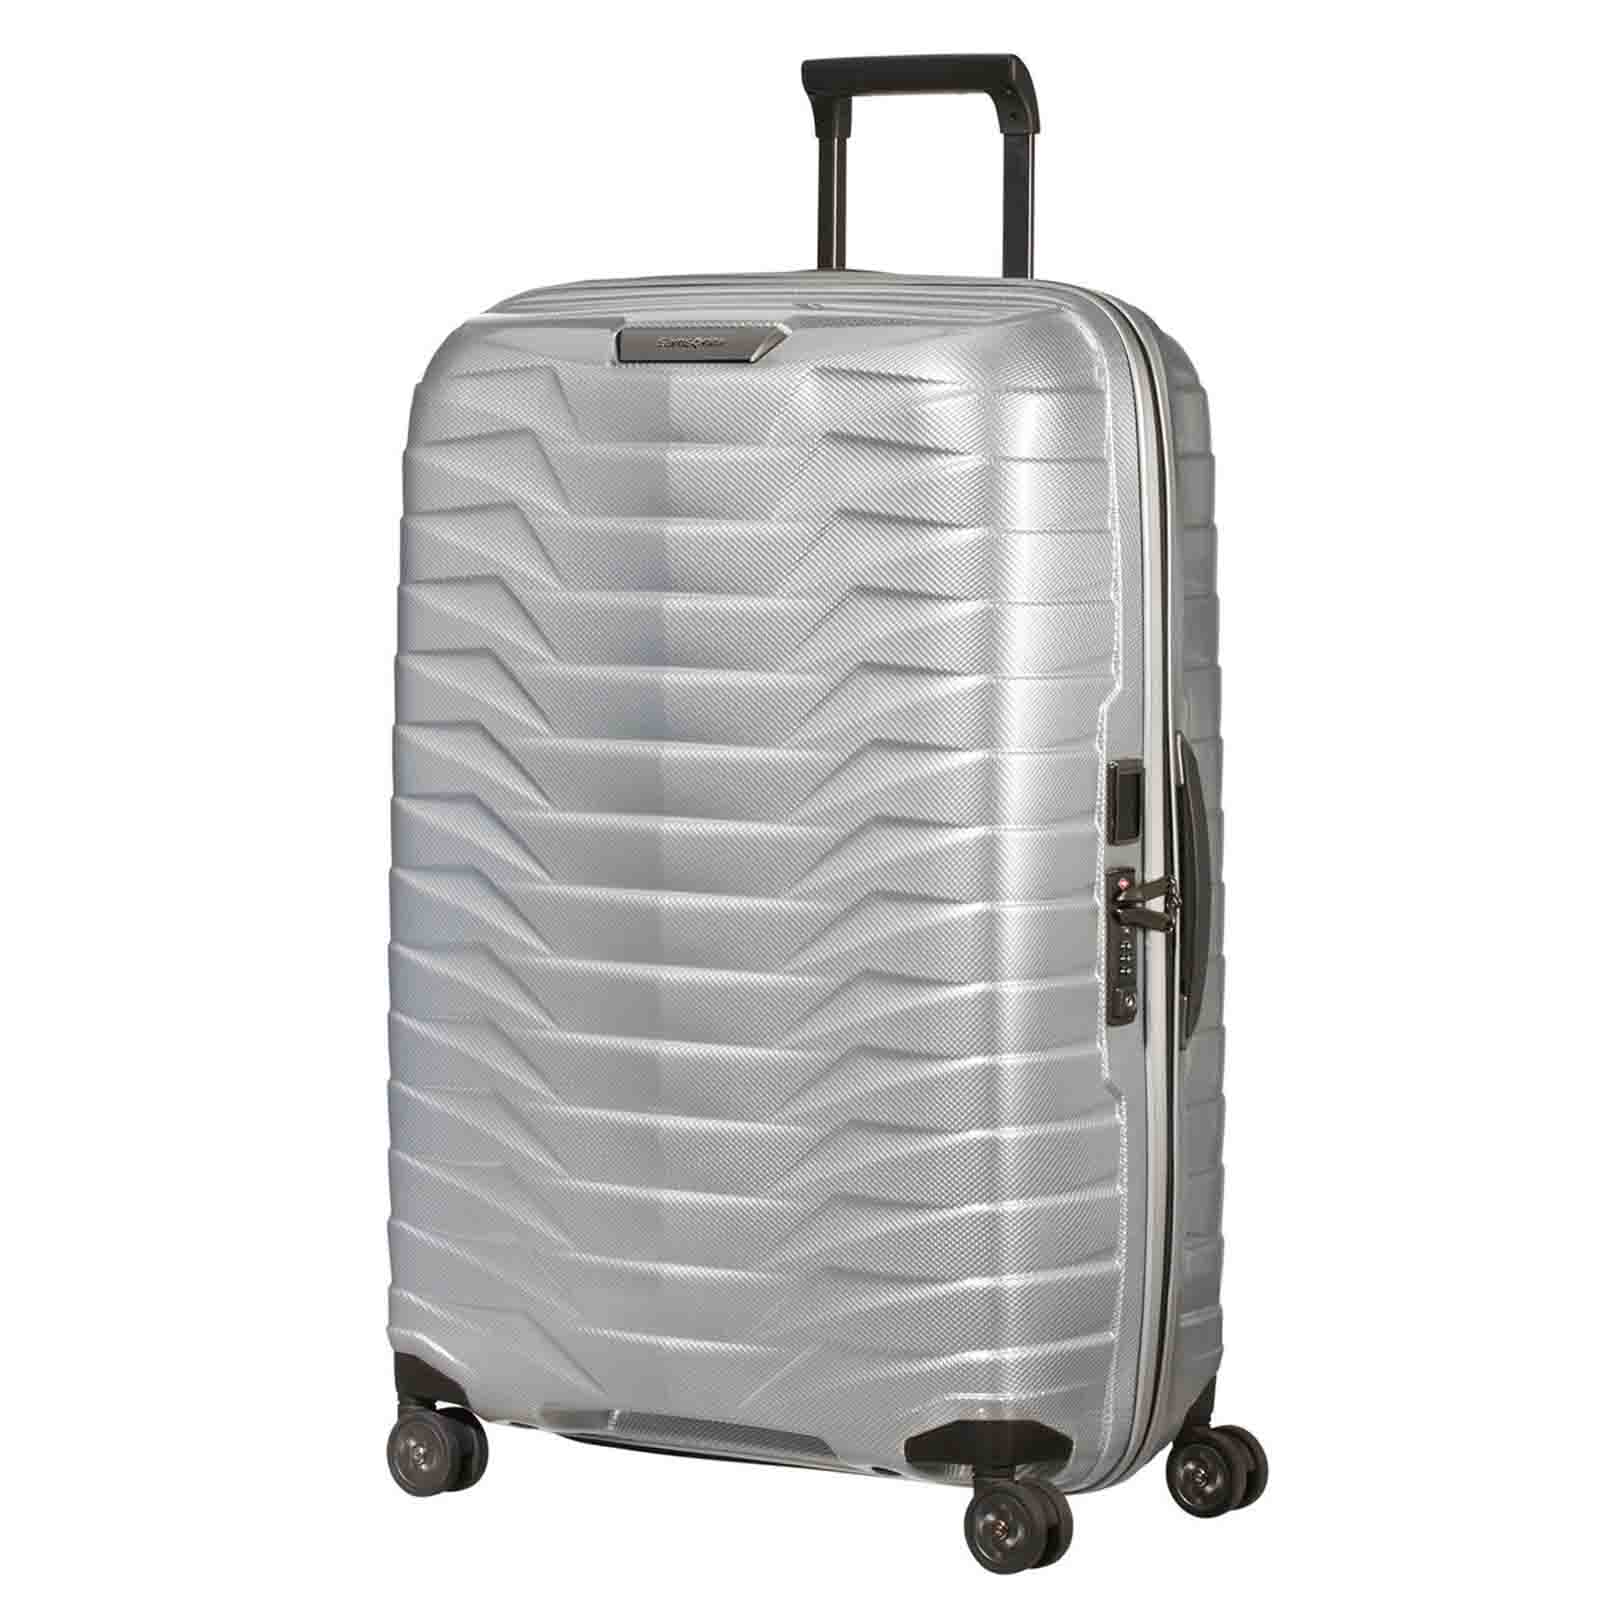 Samsonite-Proxis-75cm-Suitcase-Silver-Front-Angle